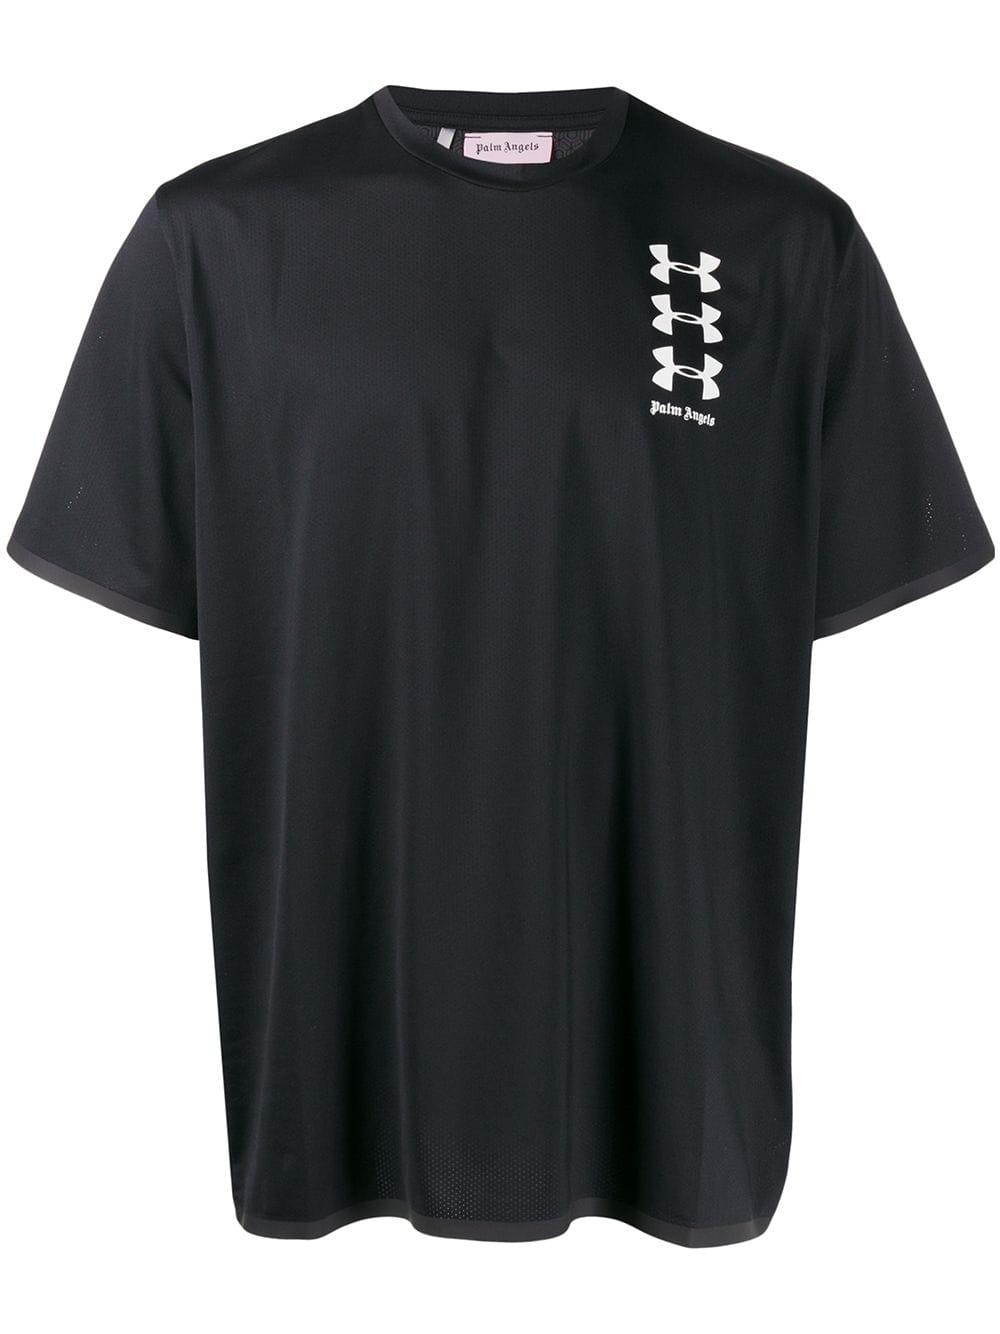 Palm Angels X Under Armour Recovery T-shirt In Black For Men Lyst |  svrtravelsindia.com